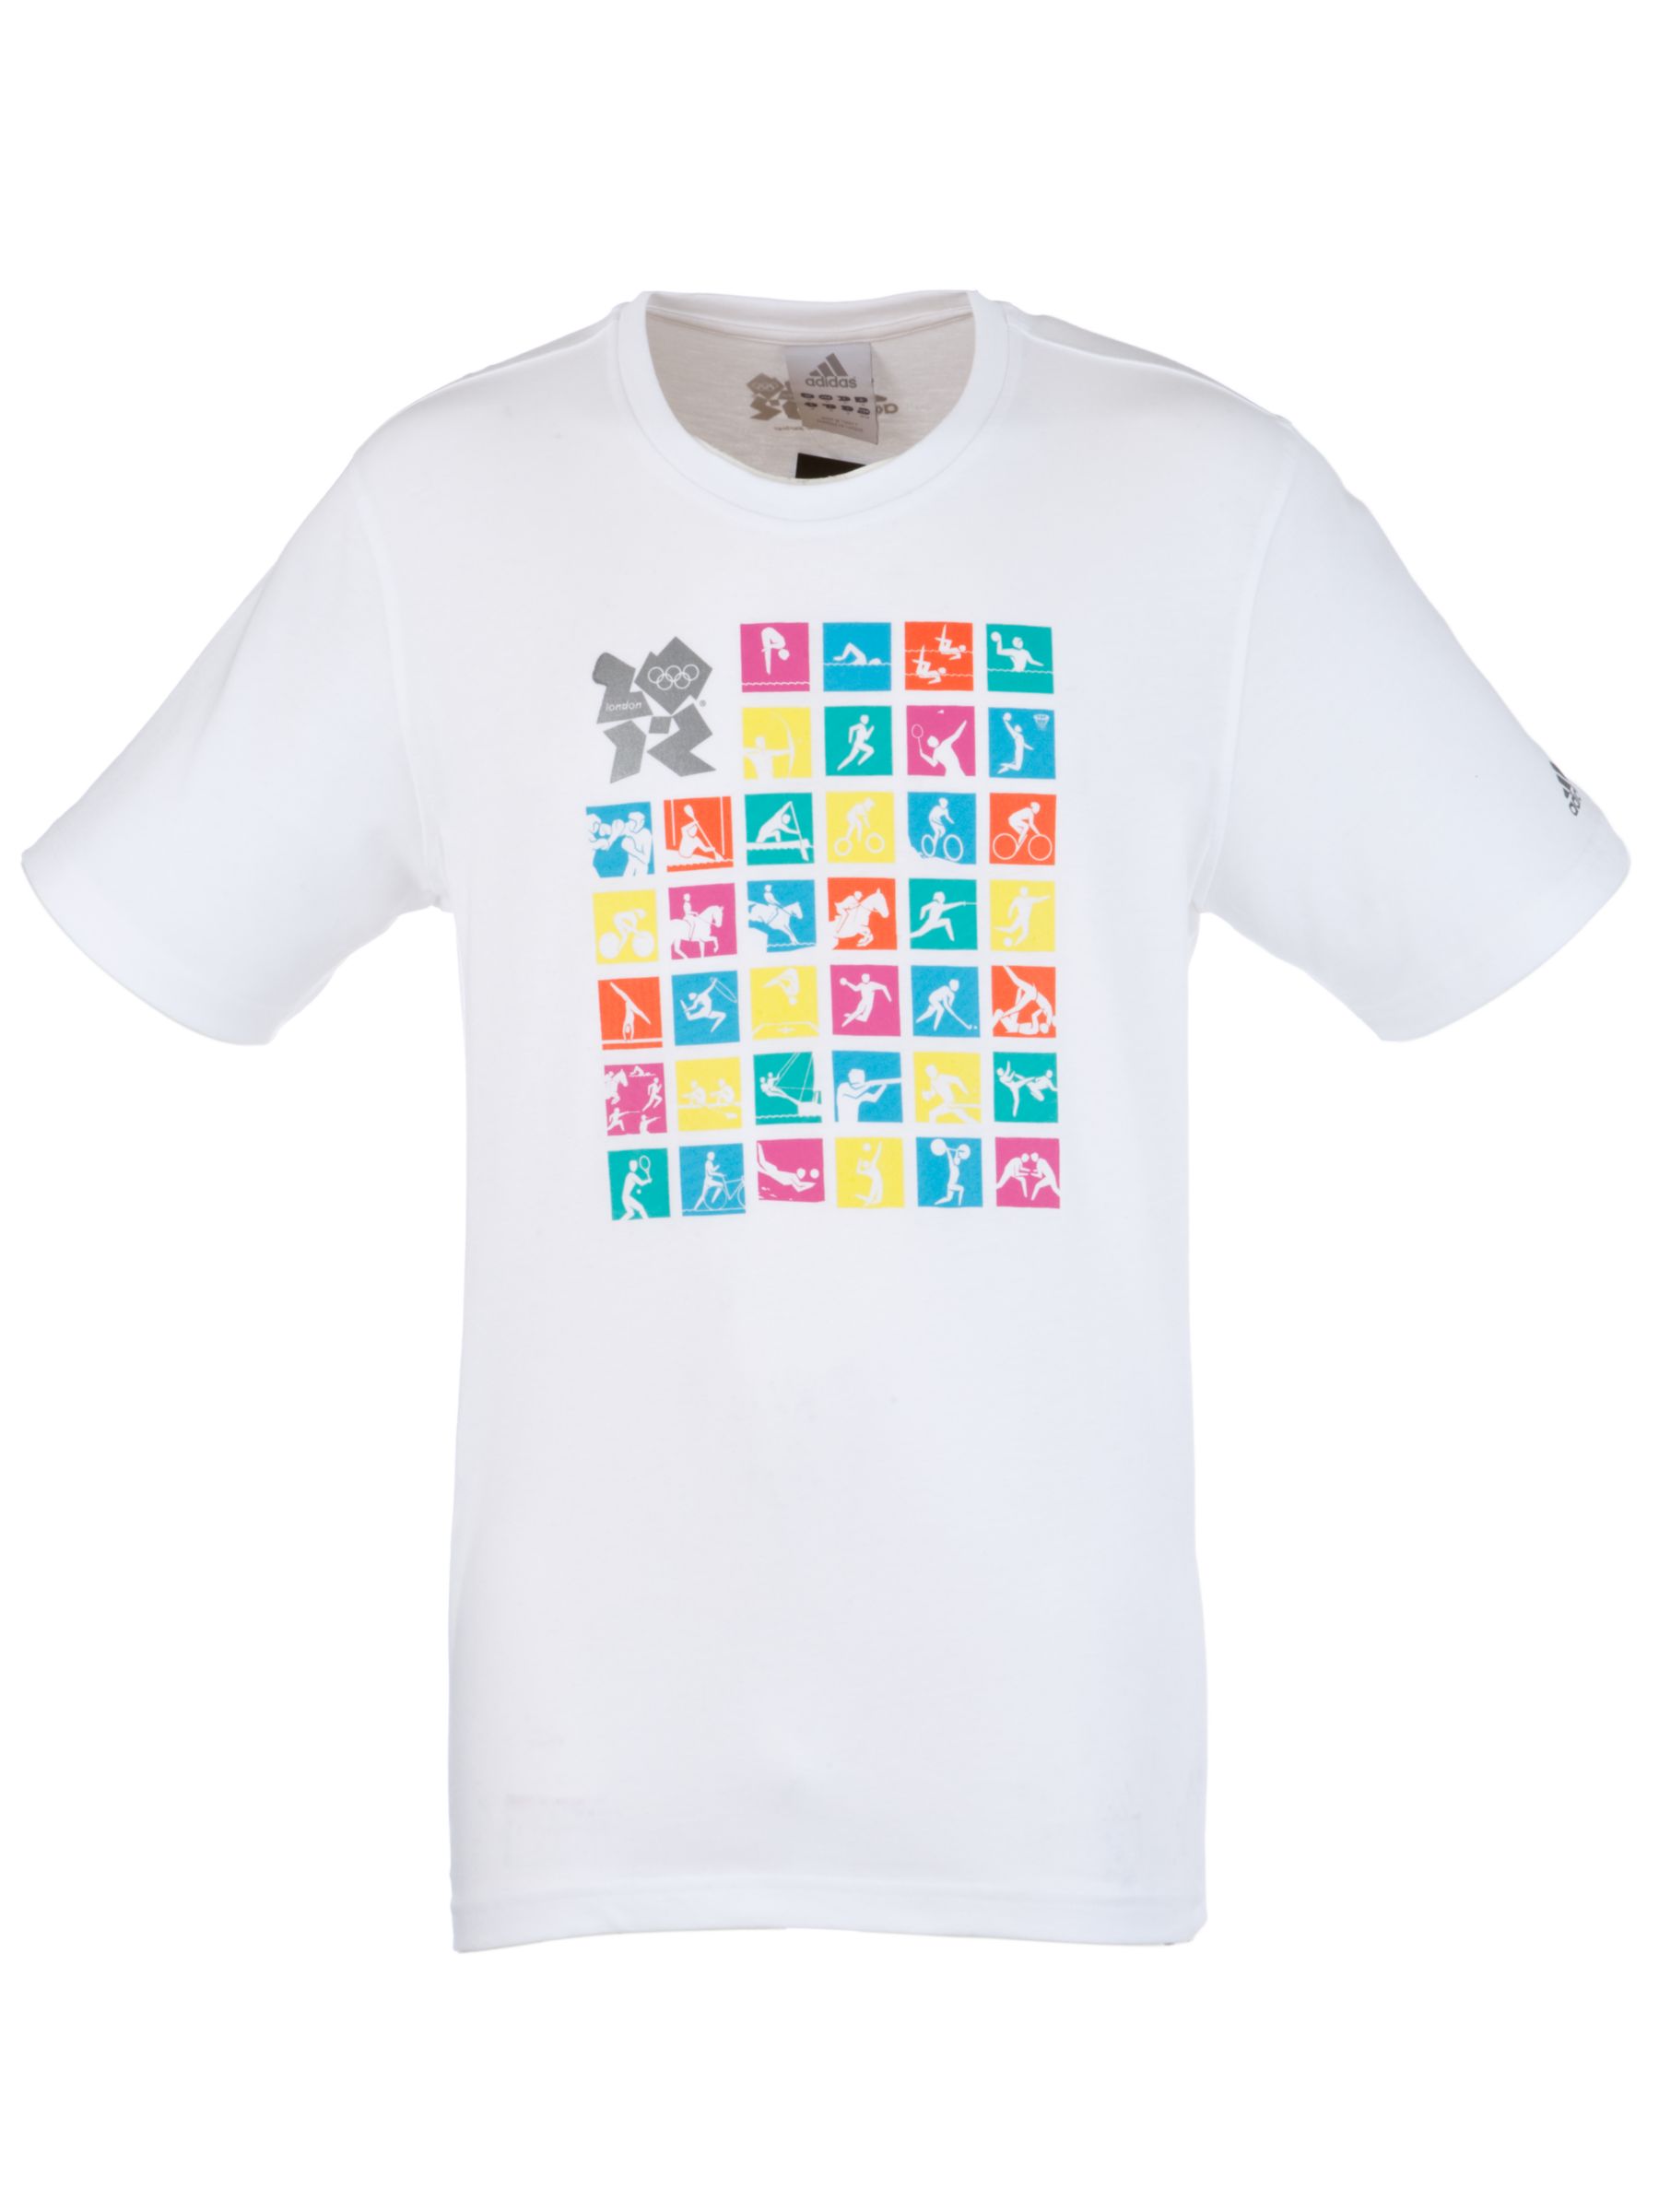 Olympic Games 2012 Pictograms T-Shirt,